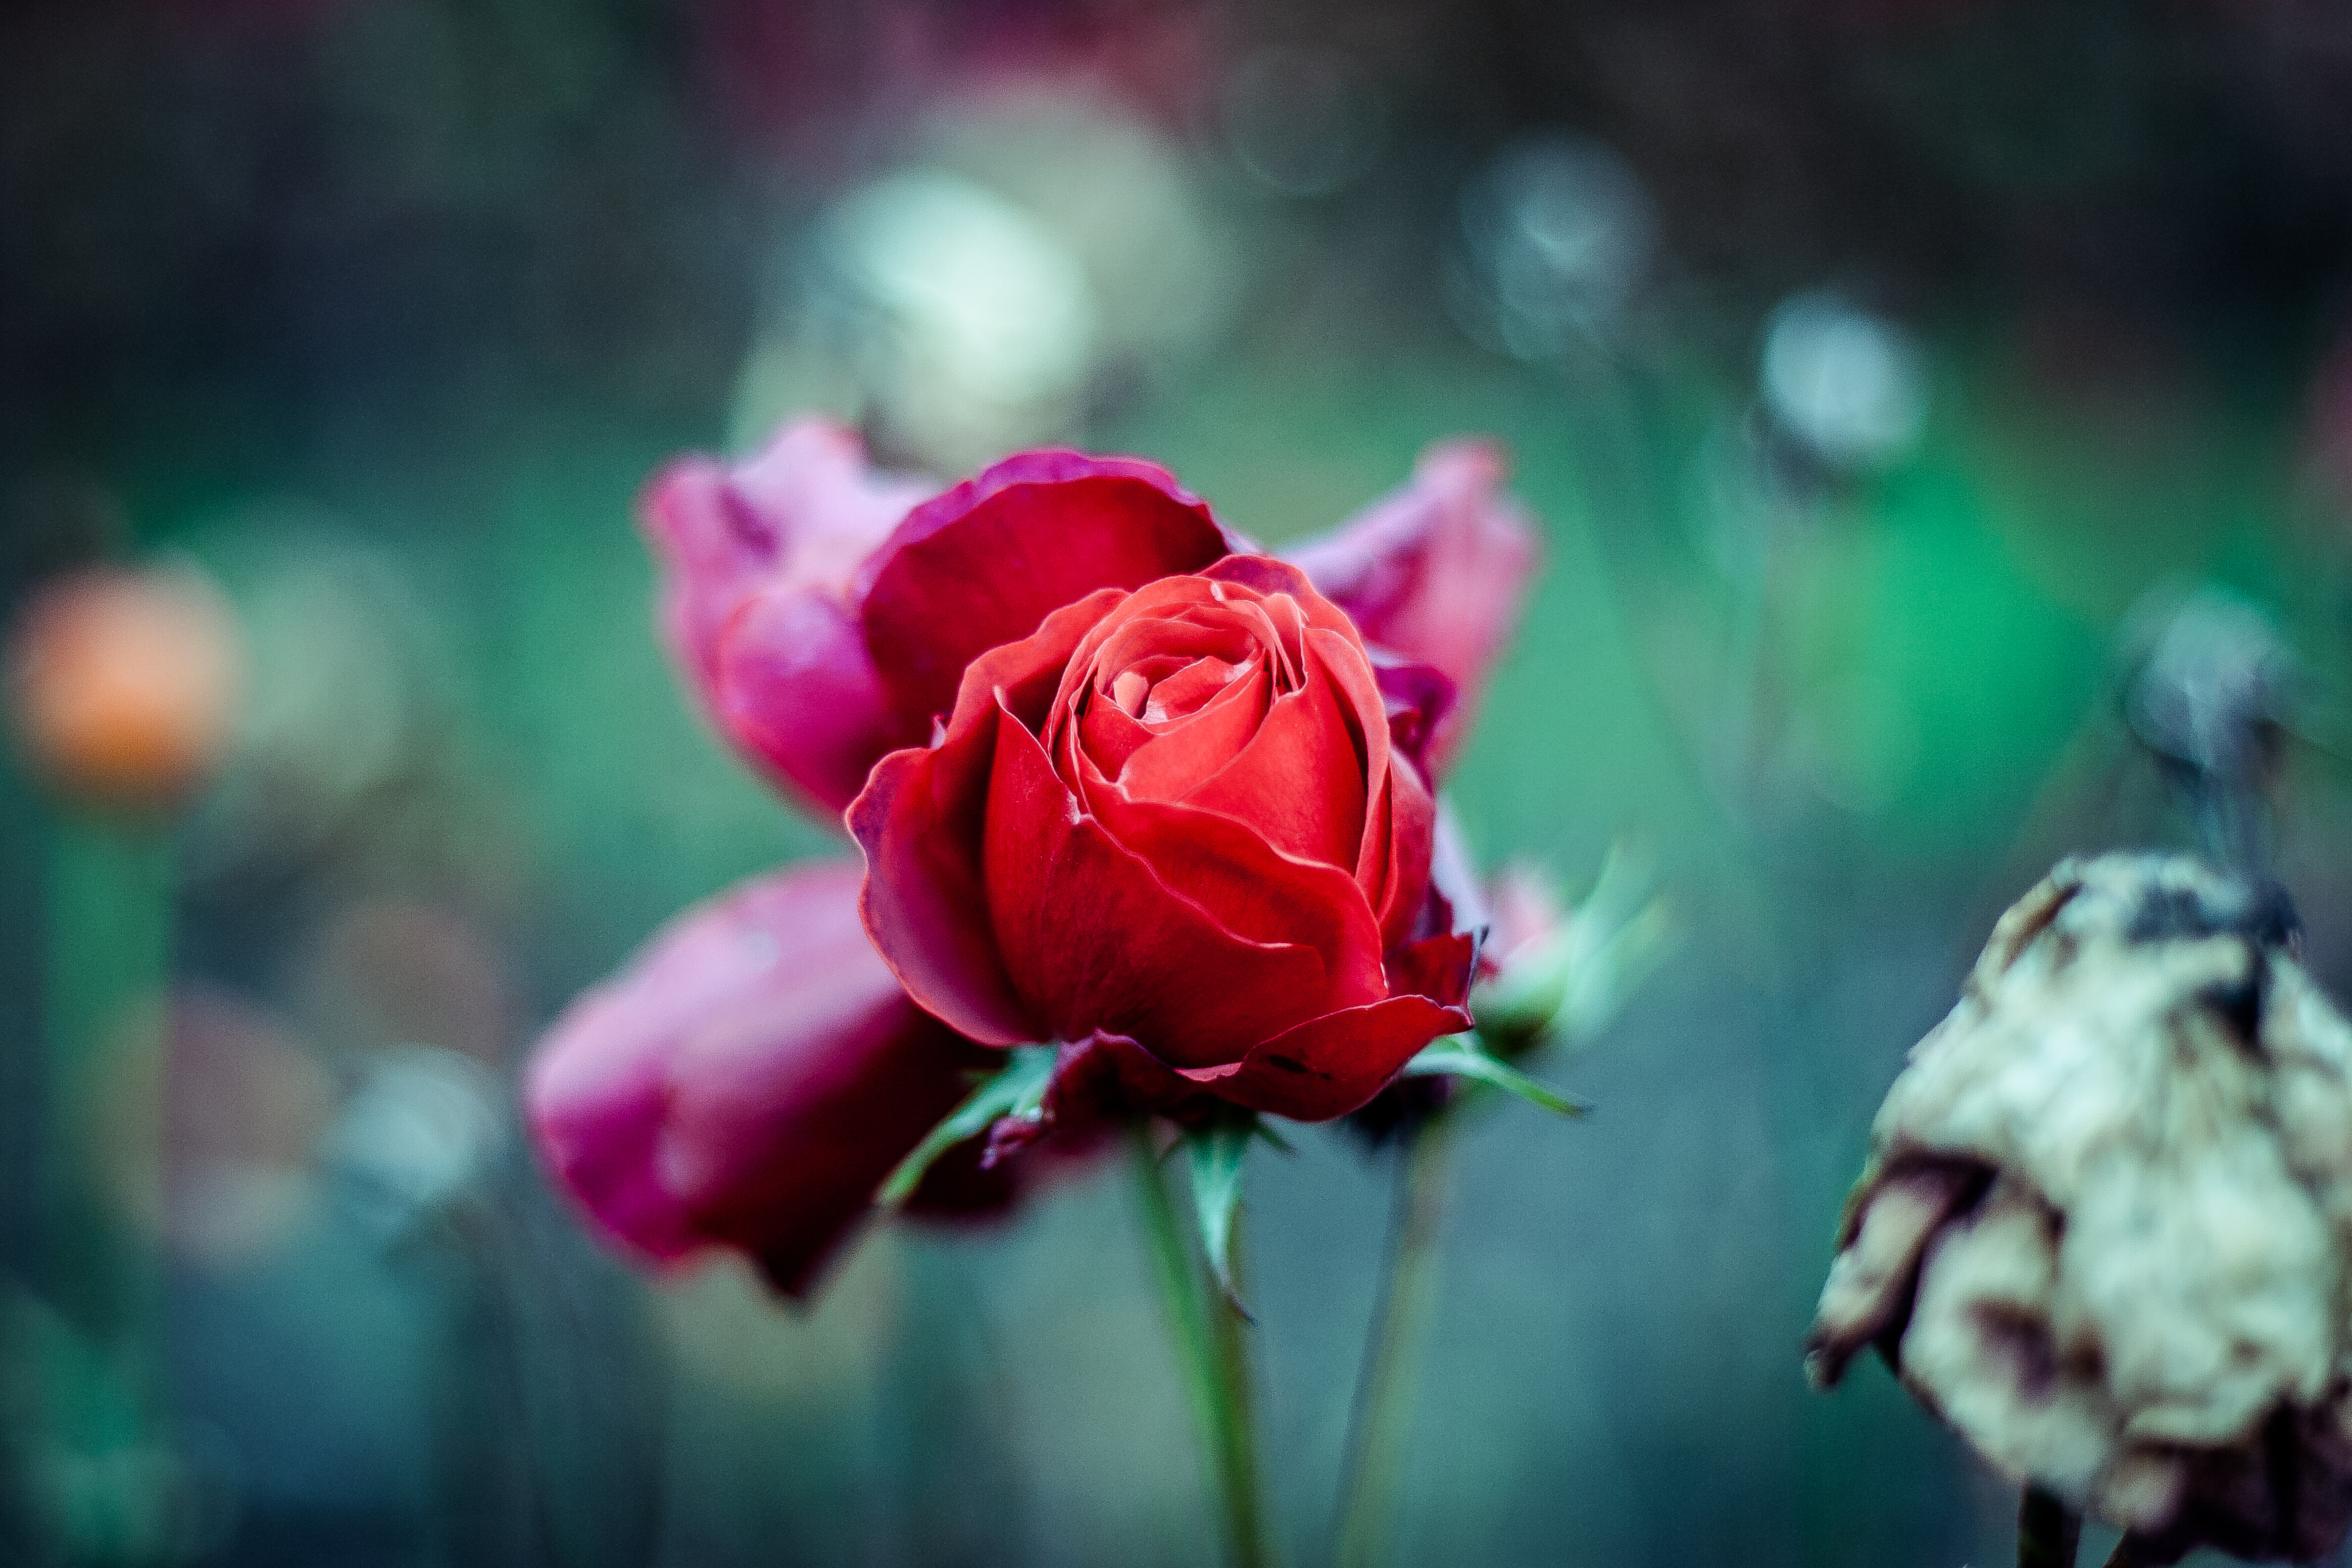 android red rose, bud, stalk, flowers, blur, smooth, stem